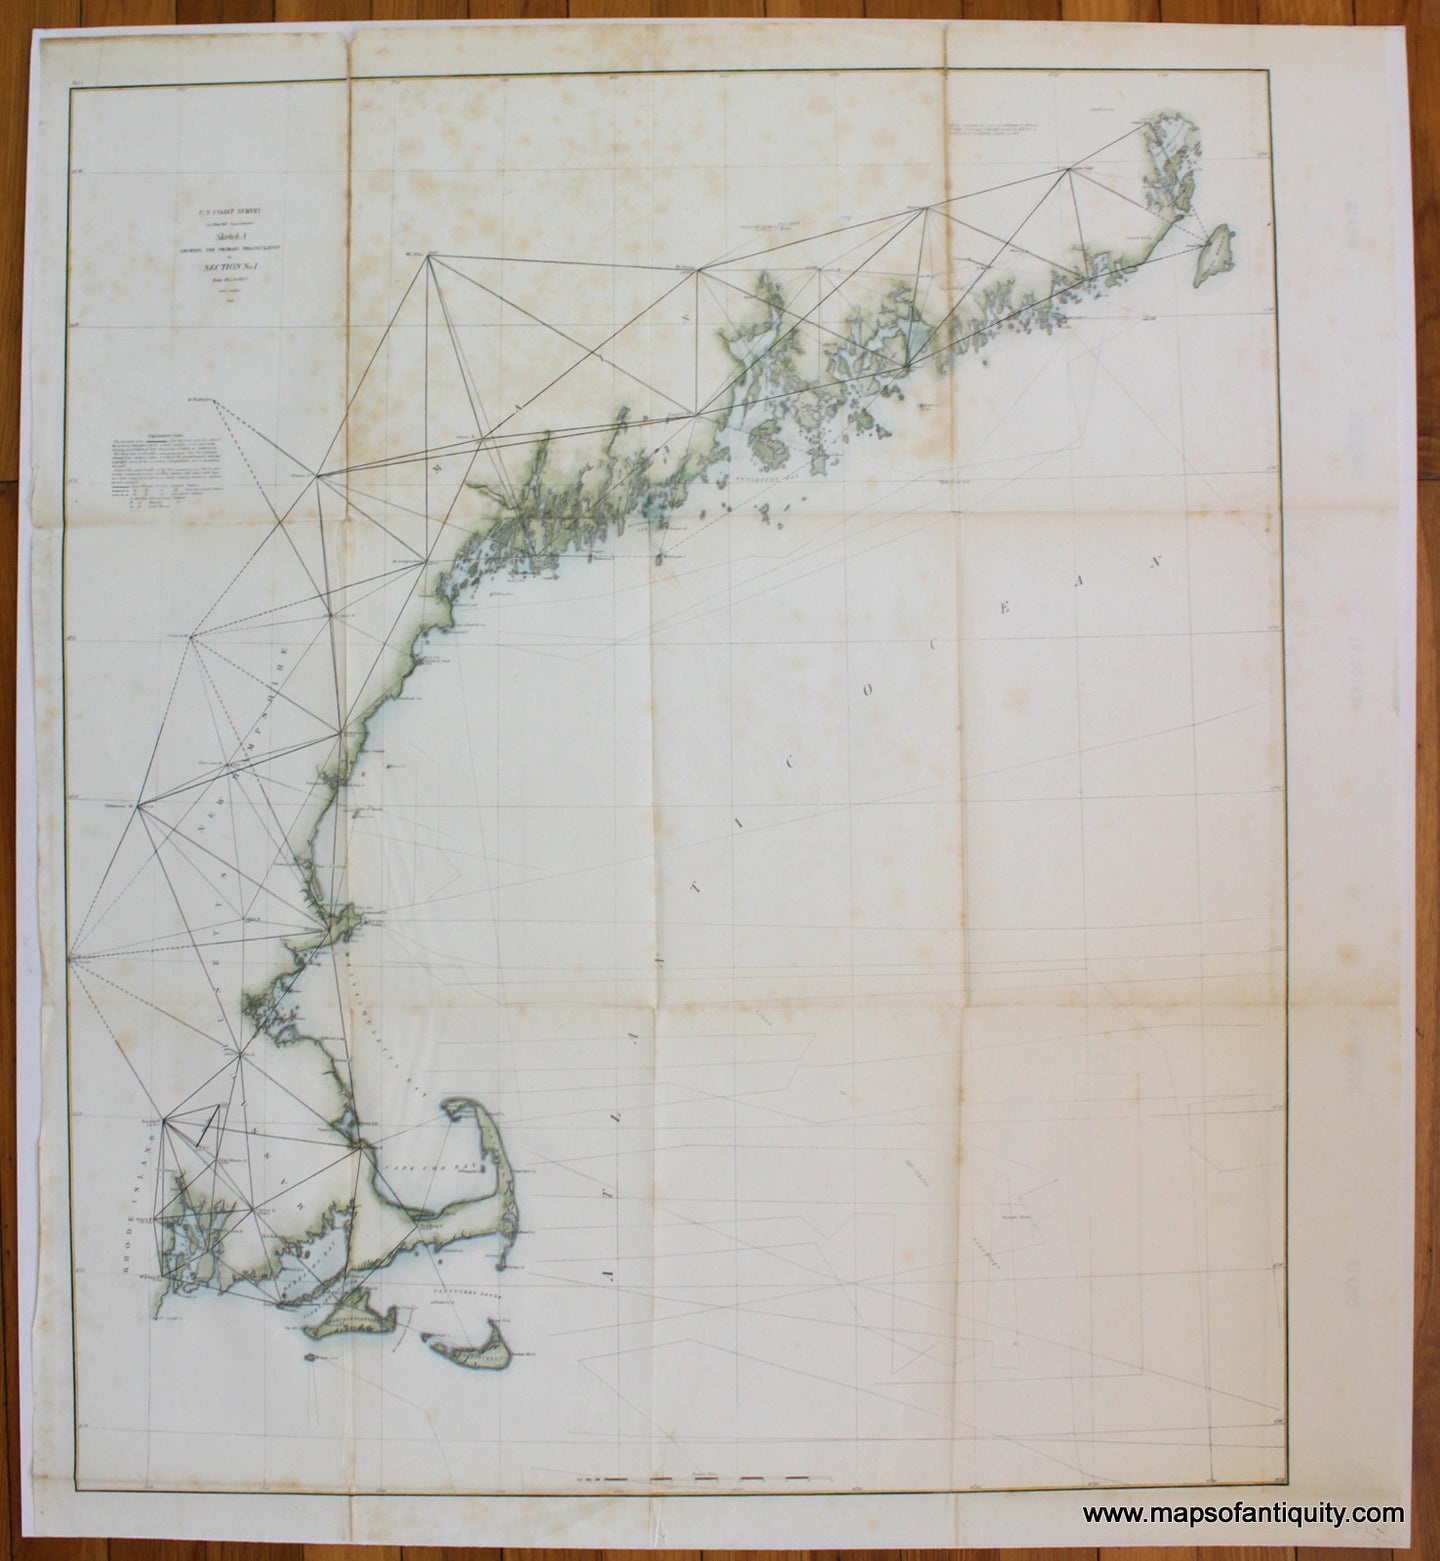 Hand-Colored-Antique-Nautical-Chart-Northeast-Coast-United-States-Coast-Survey-Sketch-A-Shewing-the-Primary-Triangulation-in-Section-No.-1-From-1844-to-1859-******-Antique-Nautical-Charts-and-Coast-Surveys-of-the-WorldÃ‚Â -Coastal-Report-Charts-New-England-1859-U.S.-Coast-Survey-Maps-Of-Antiquity